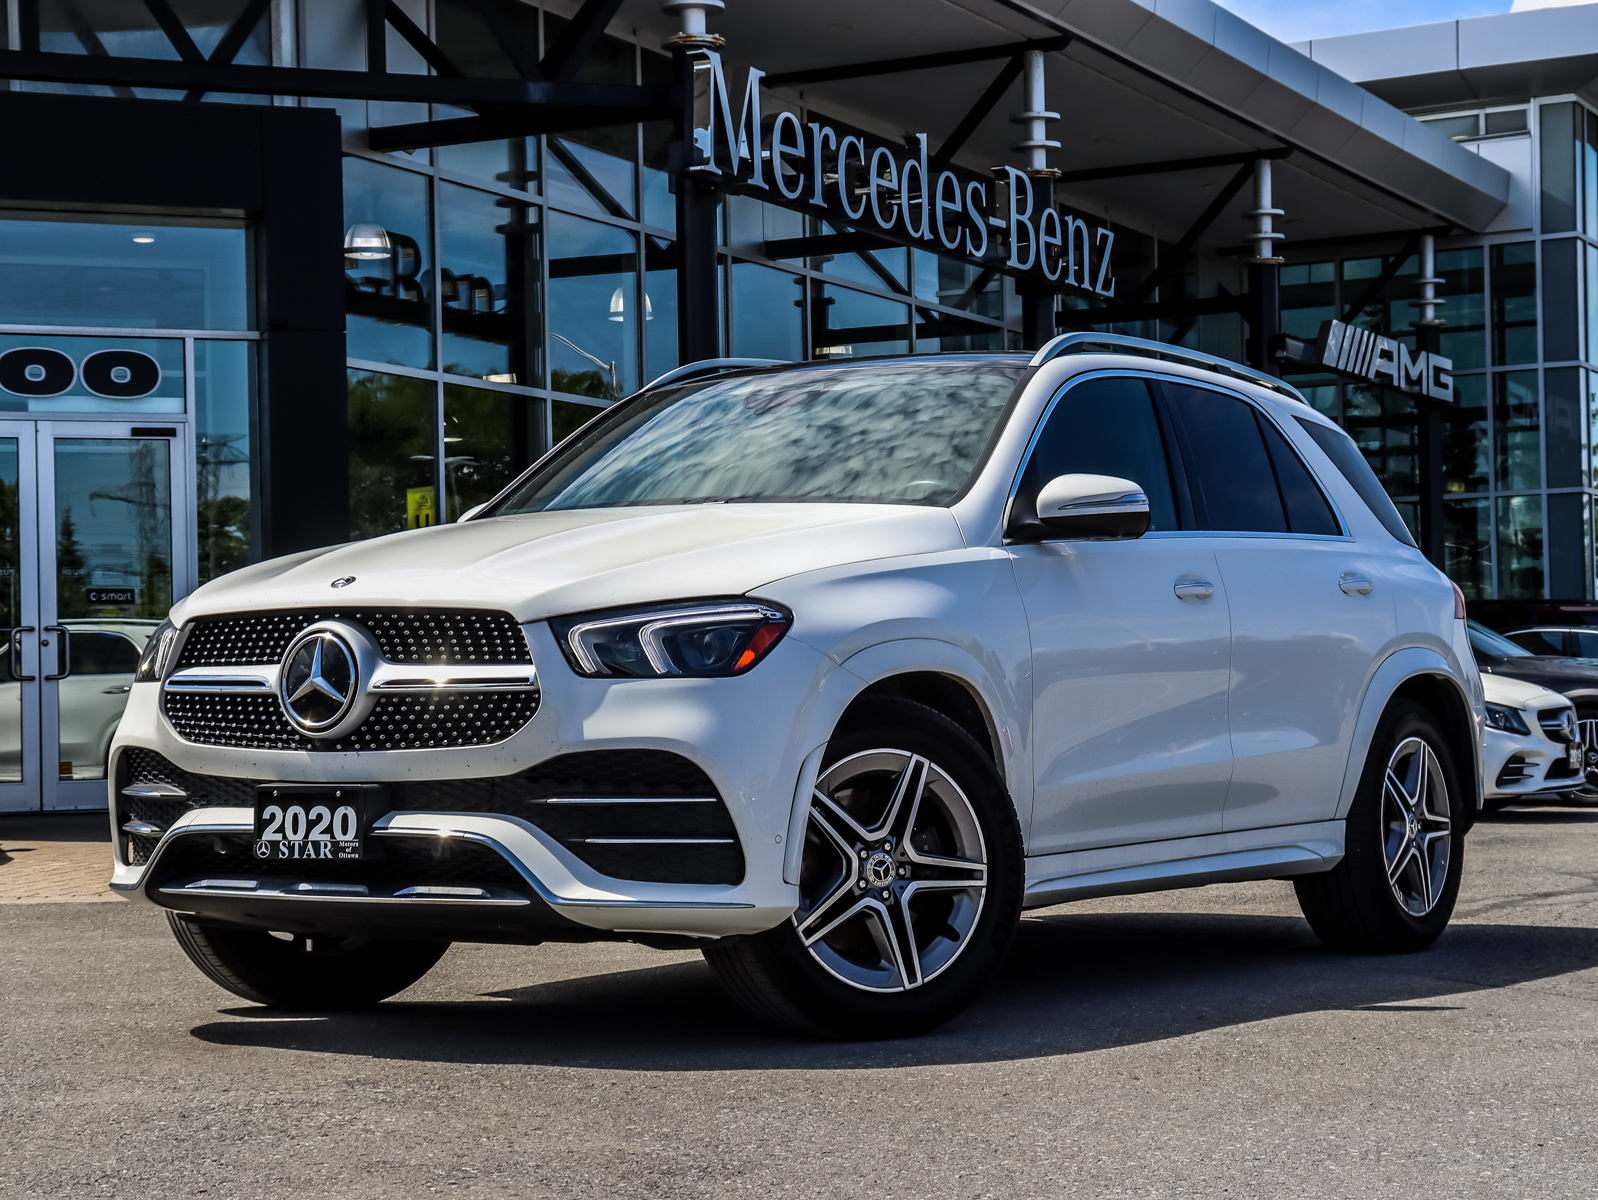 2020 Mercedes-Benz GLE 4MATIC CERTIFIED PRE-OWNED